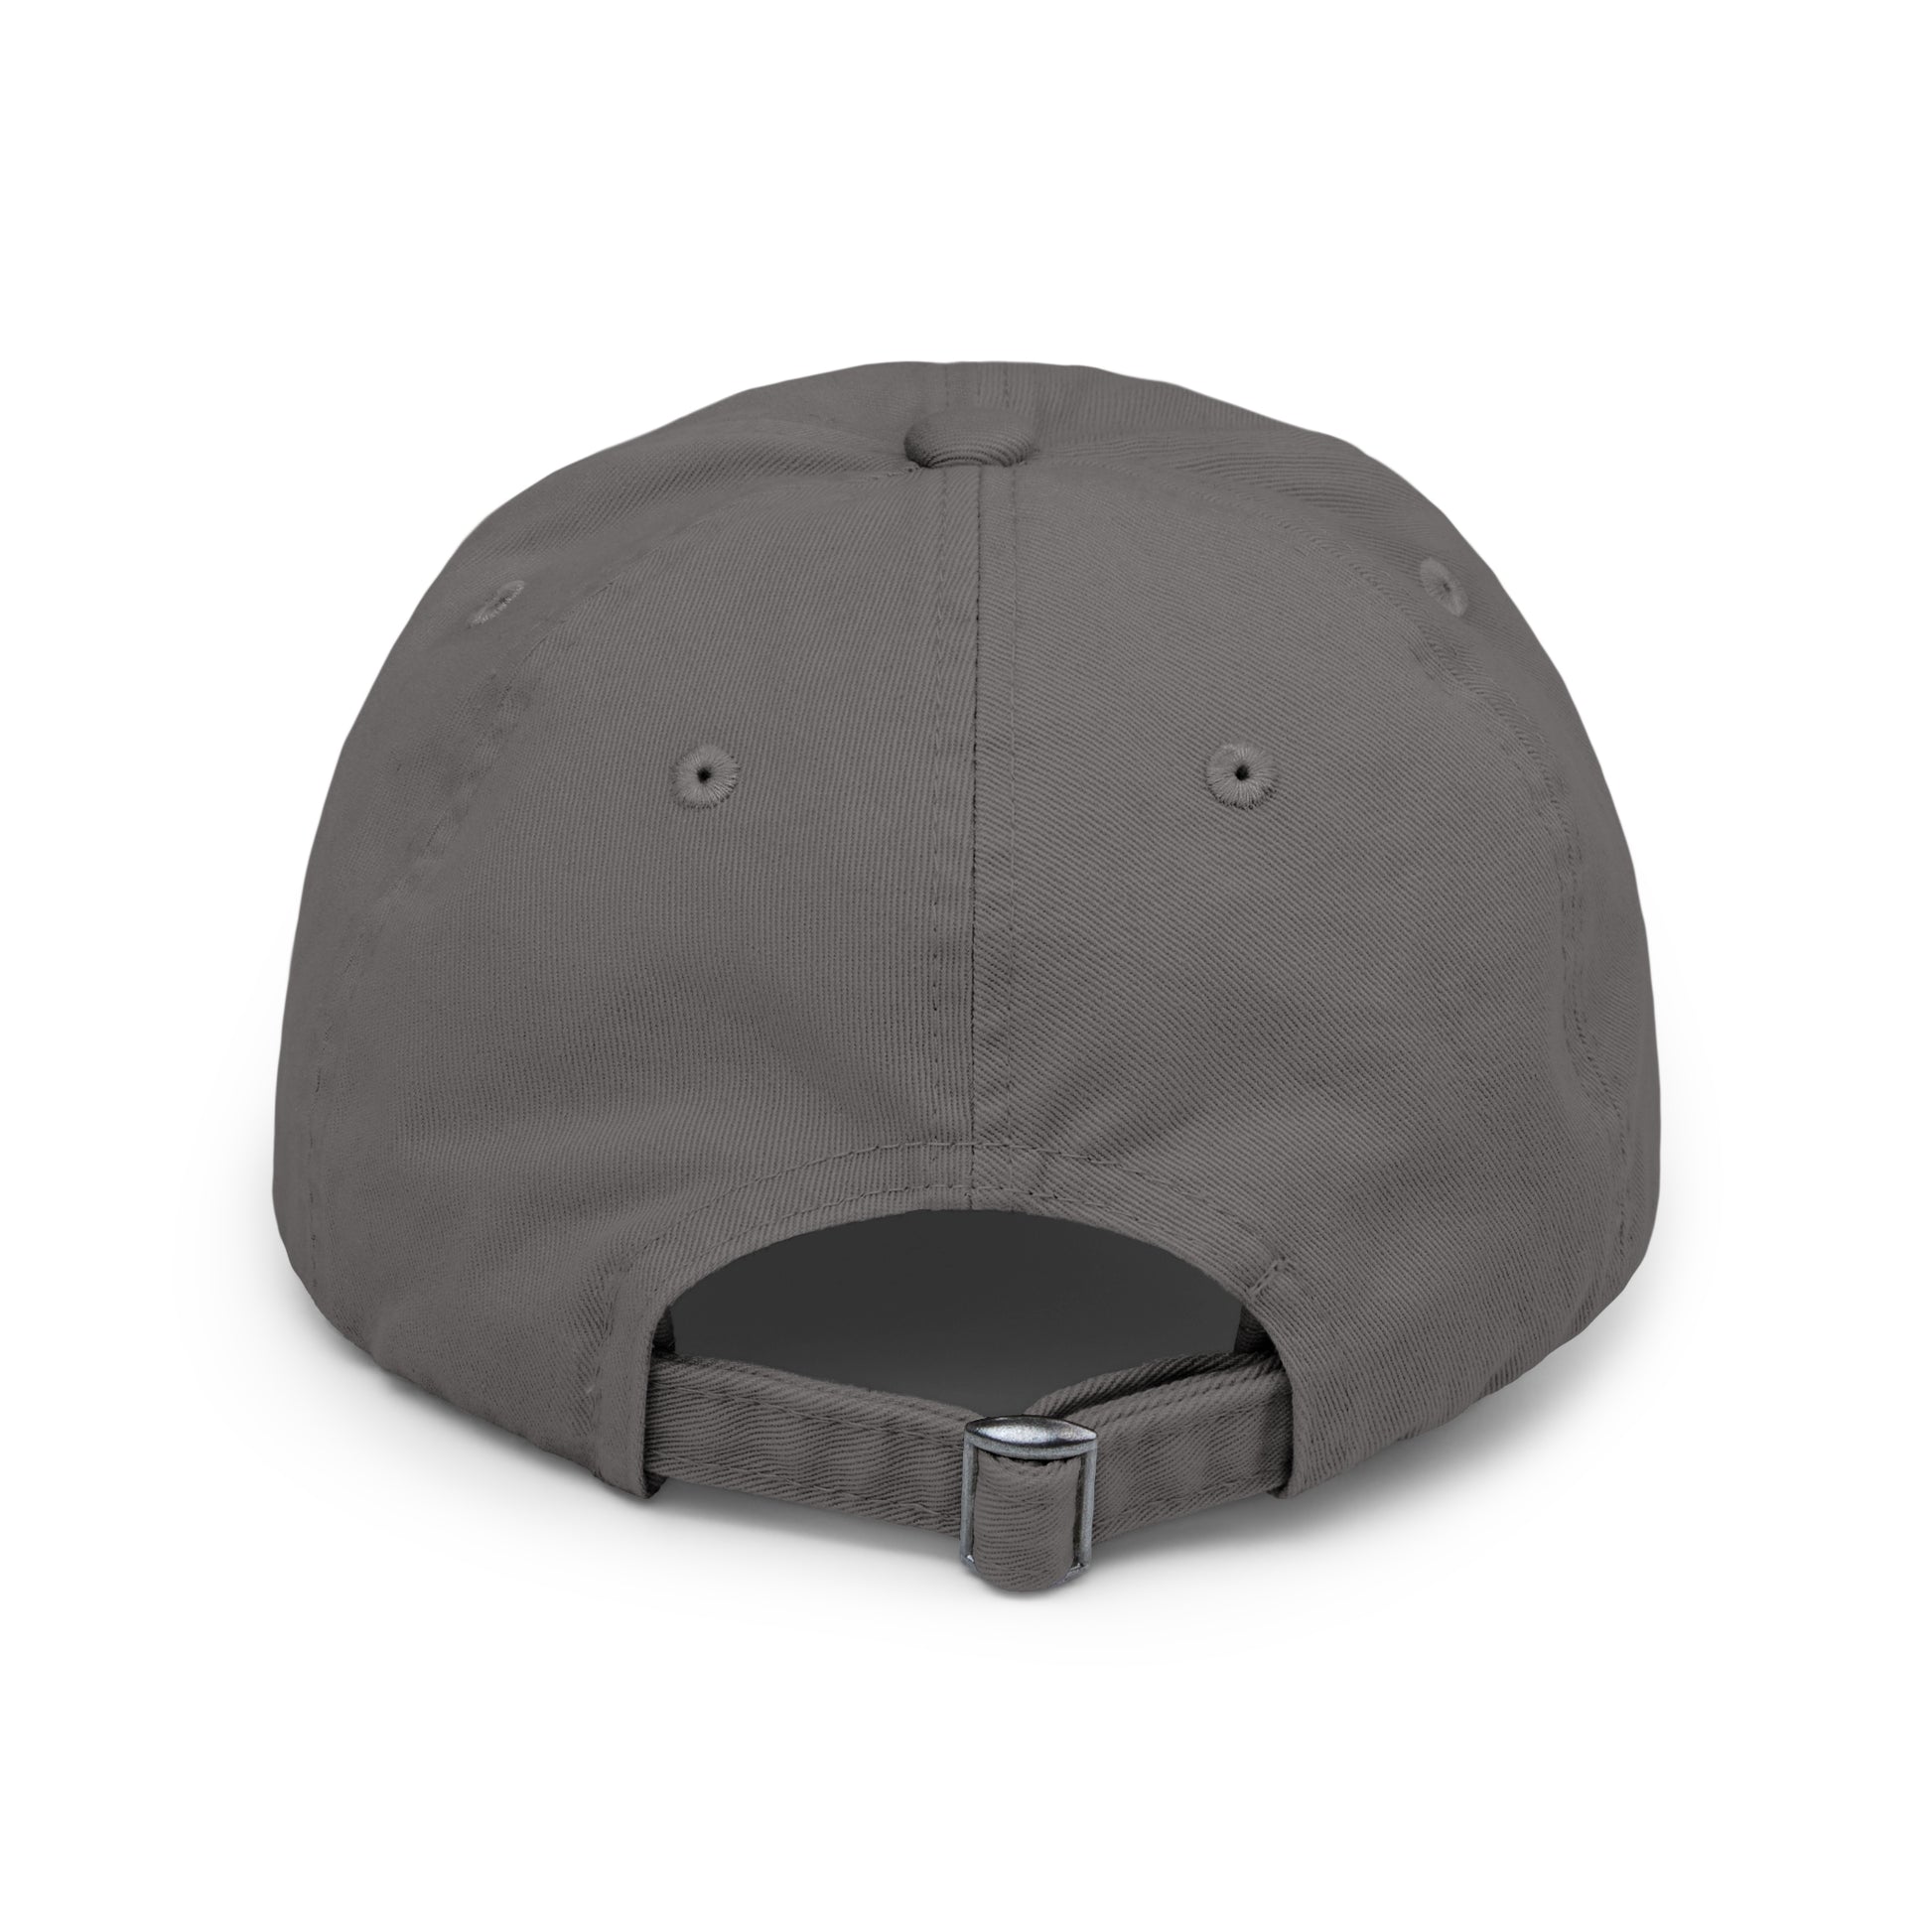 This image showcases the back view of a hat and the adjustment strap.